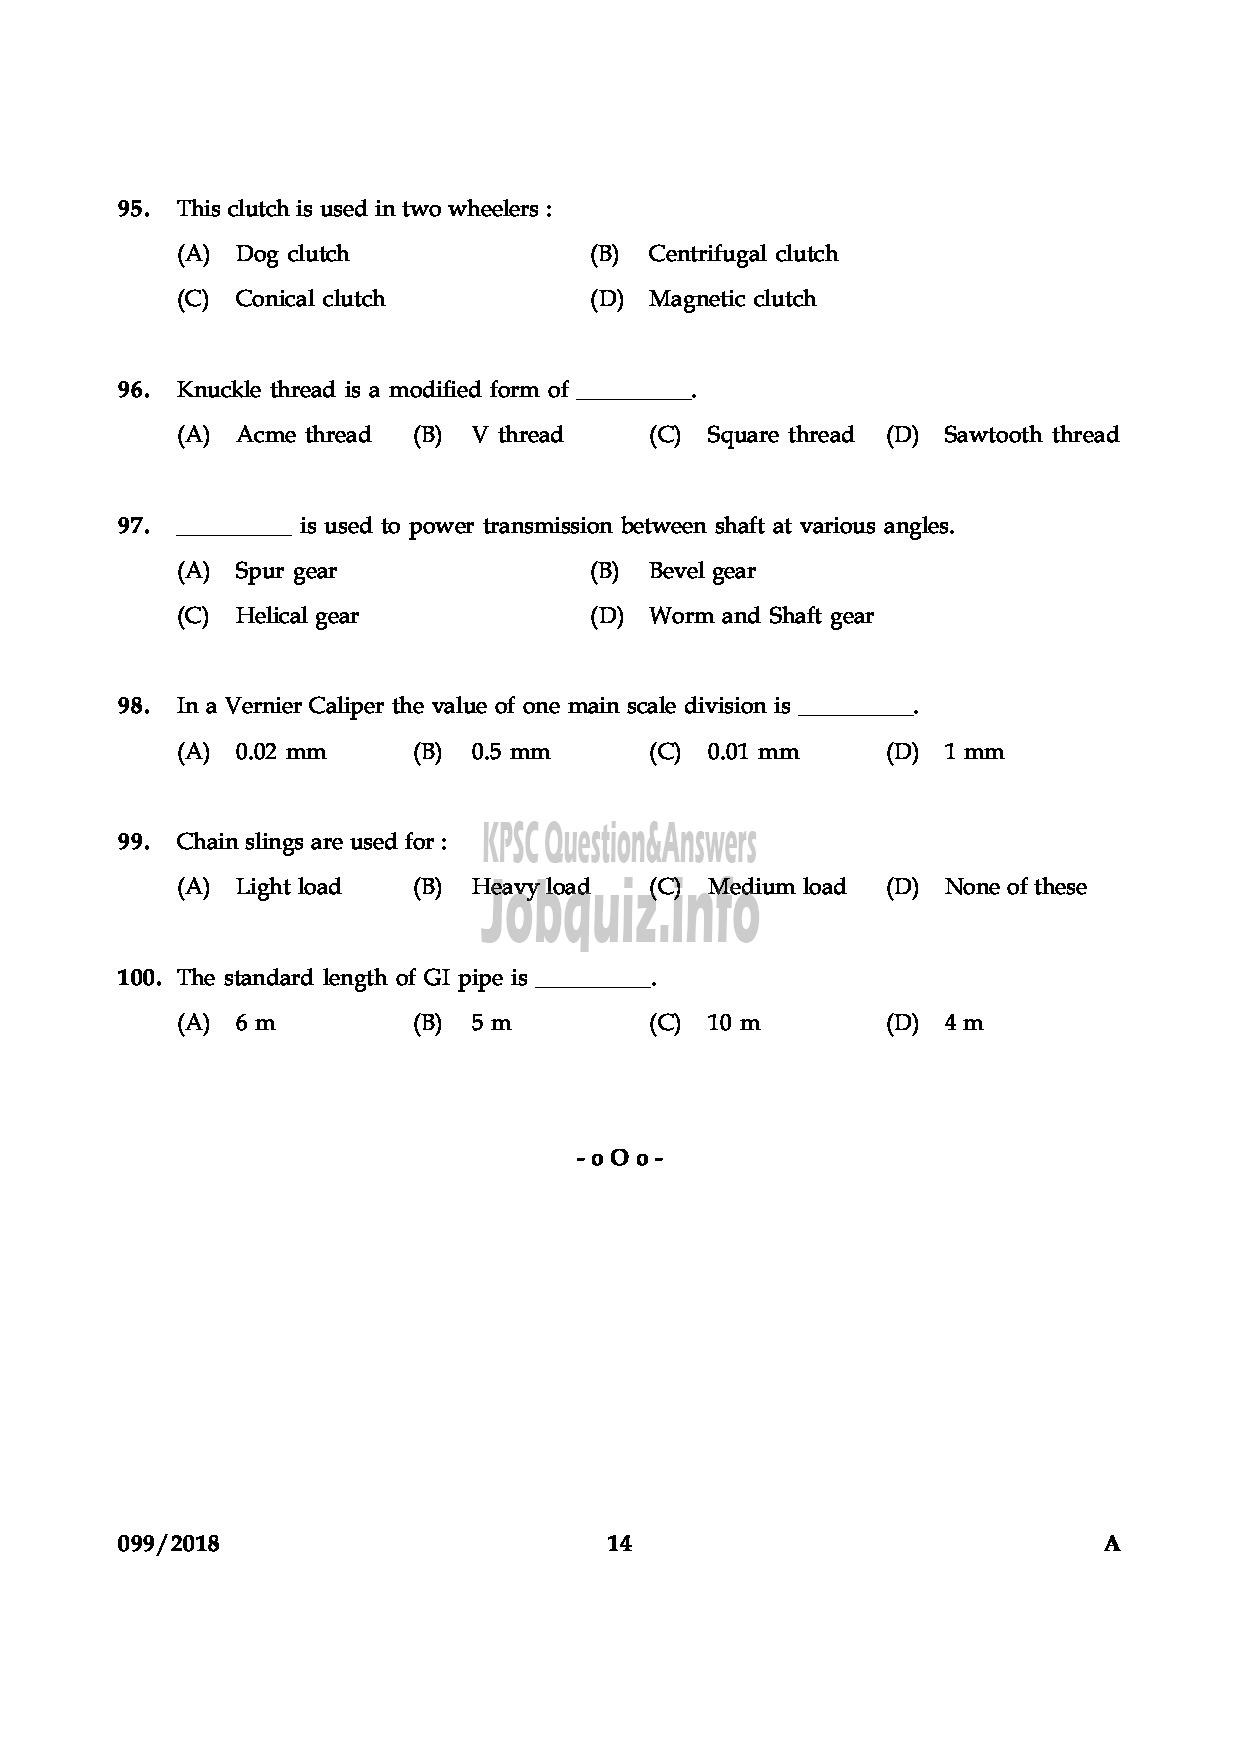 Kerala PSC Question Paper - JUNIOR INSTRUCTOR FITTER INDUSTRIAL TRAINING ENGLISH -14